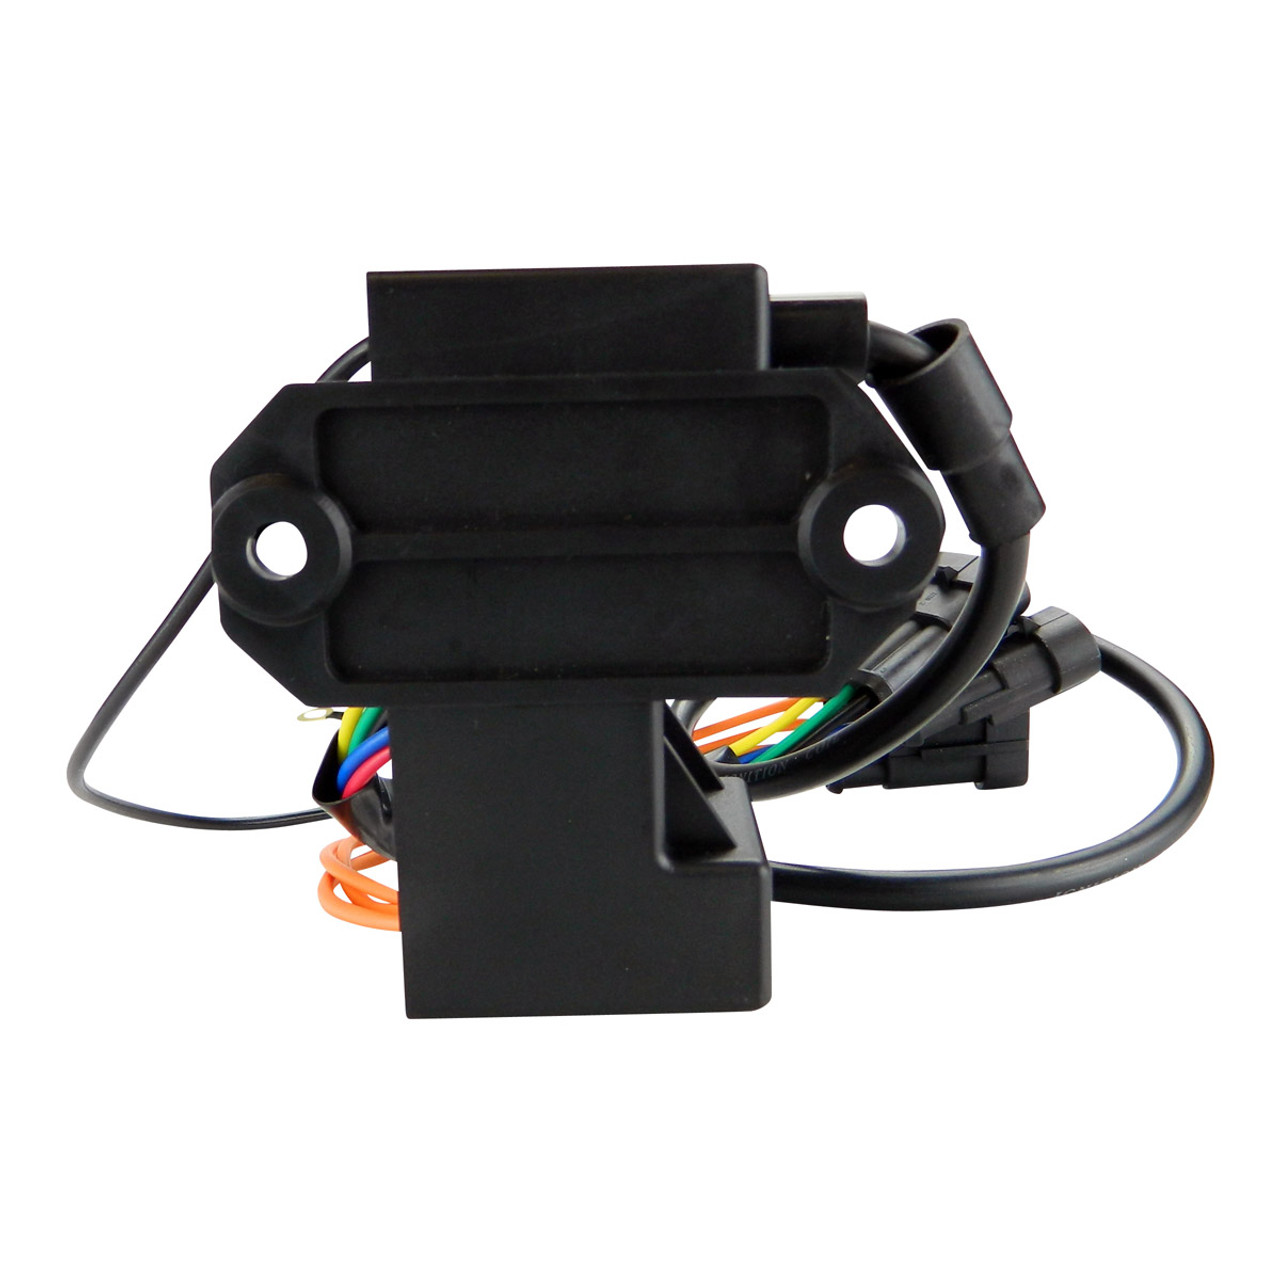 RMSTATOR New Aftermarket Ski-doo CDI Box Ignition Coil Calibrated Module, RMS030-104540